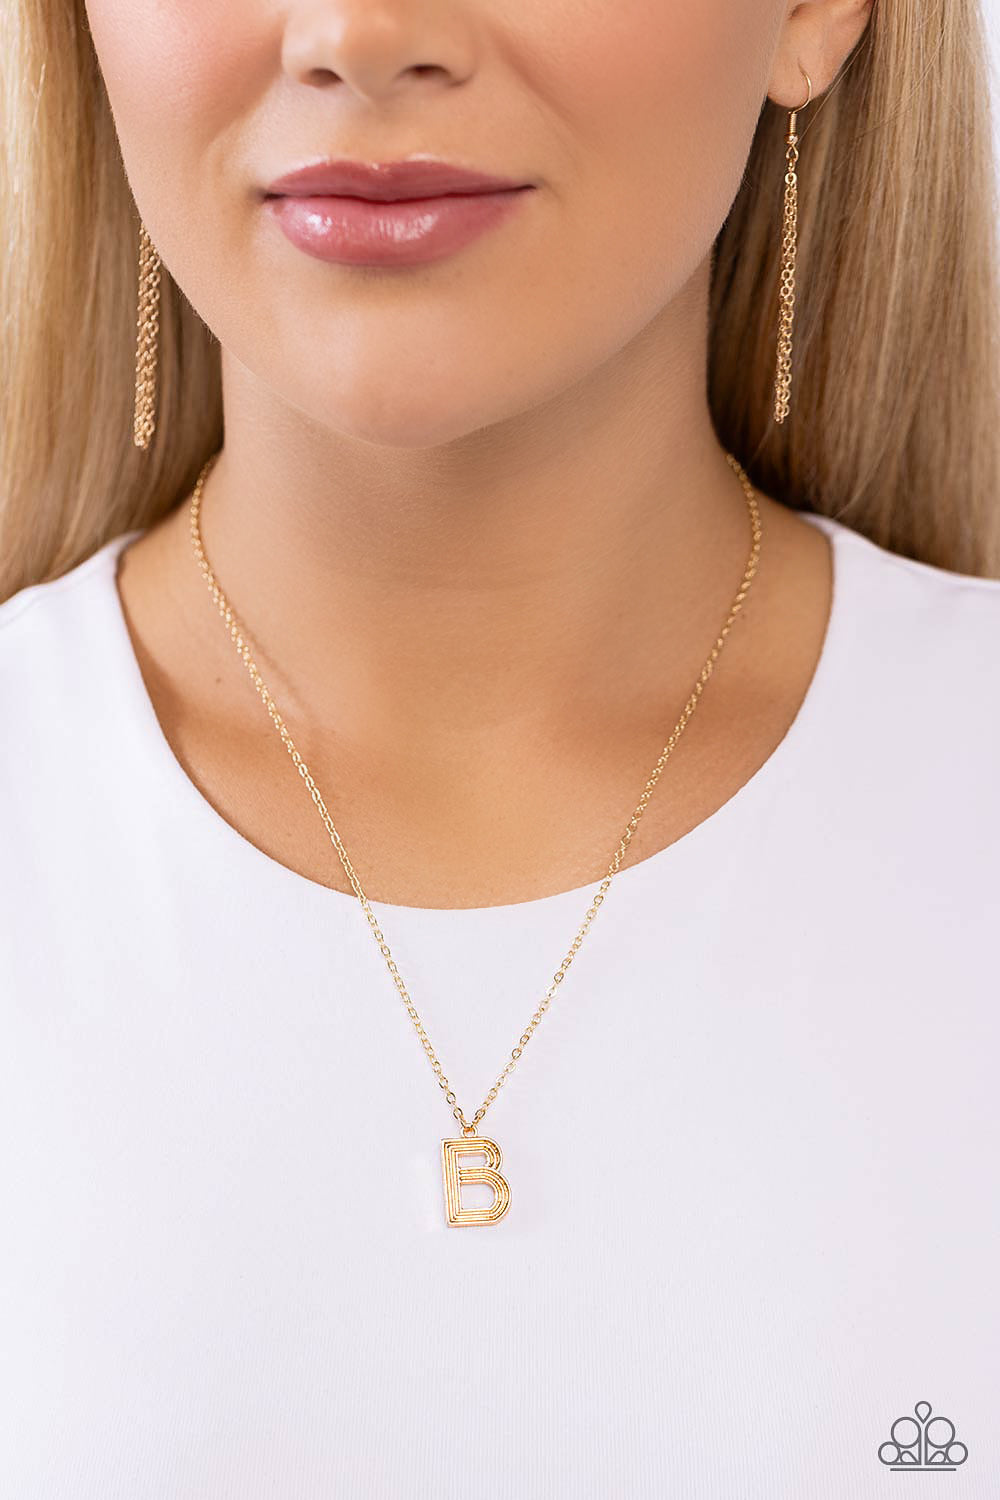 Leave Your Initials Gold *B* Necklace Paparazzi